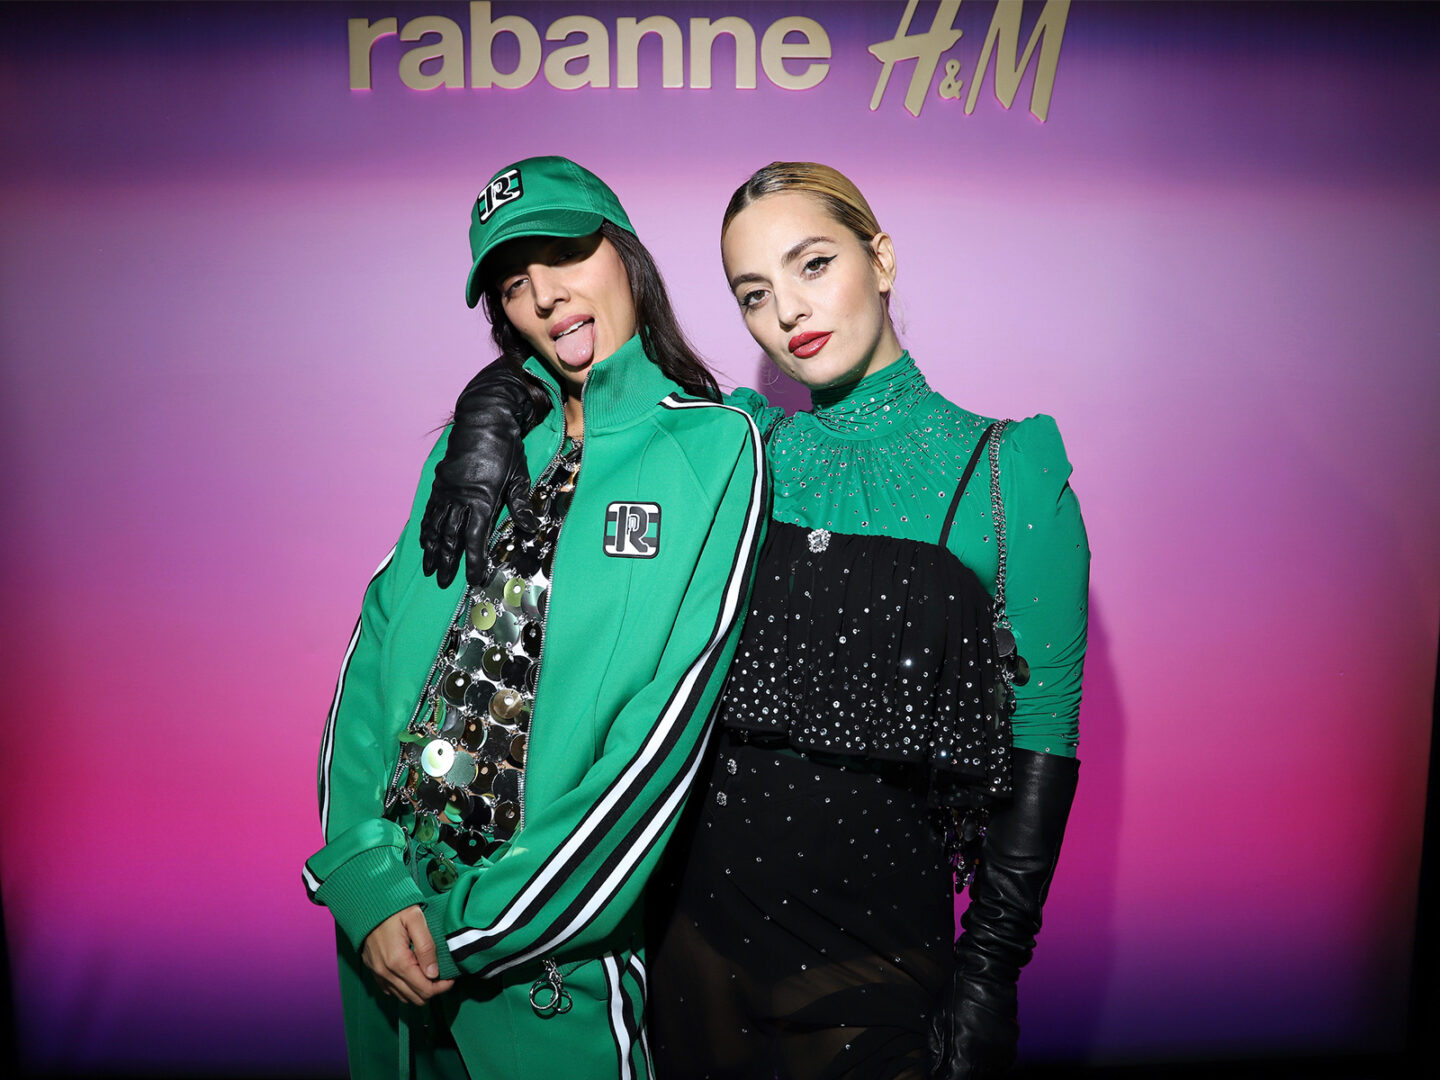 This is how the rabanne H&M collection was celebrated in Madrid